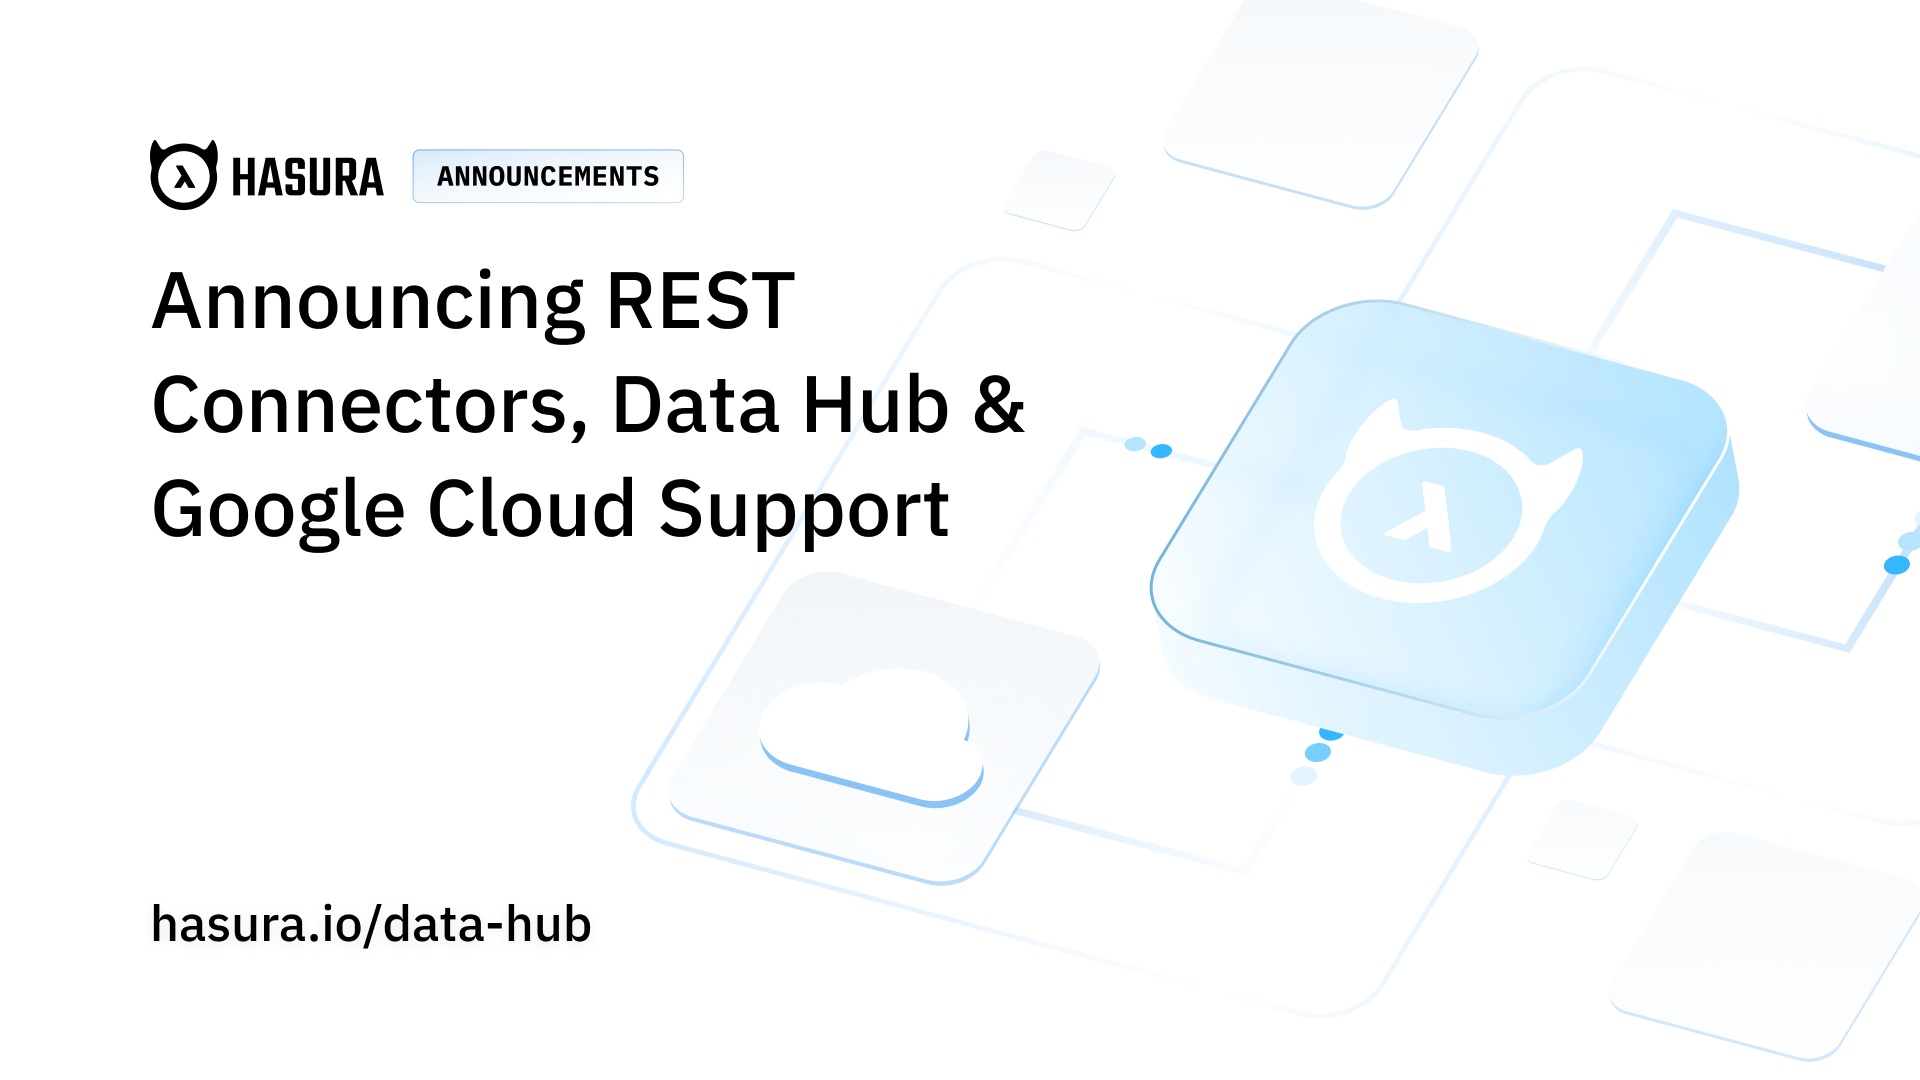 Bring REST APIs as a data source to Hasura: Announcing REST Connectors, Data Hub & Google Cloud Support